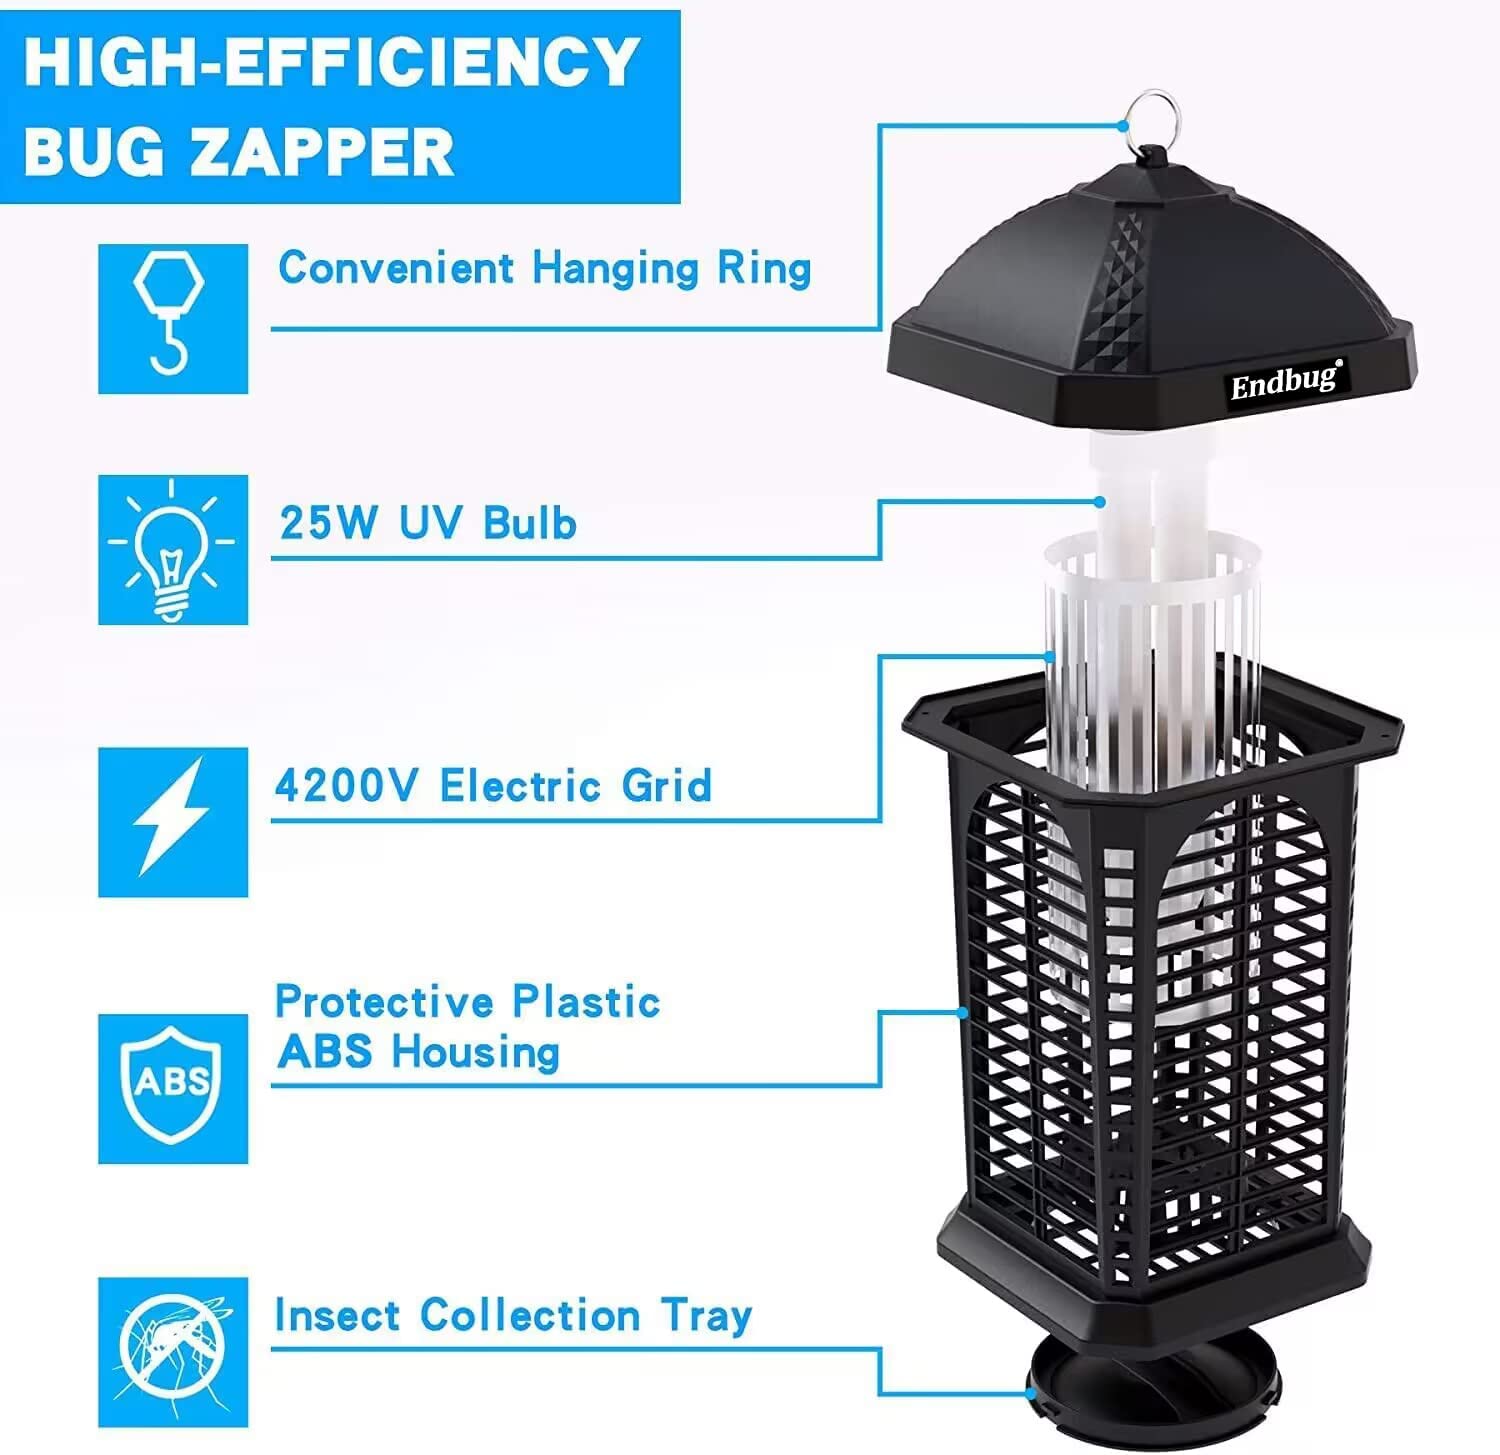 LED-Desk-Lights-Electric-Insect-Killer-Bug-Zappers-Powerful-4200V-25W-Waterproof-Mosquito-Zappers-Lamp-with-UV-Light-Protective-ABS-Housing-for-Indoor-Outdoor-84